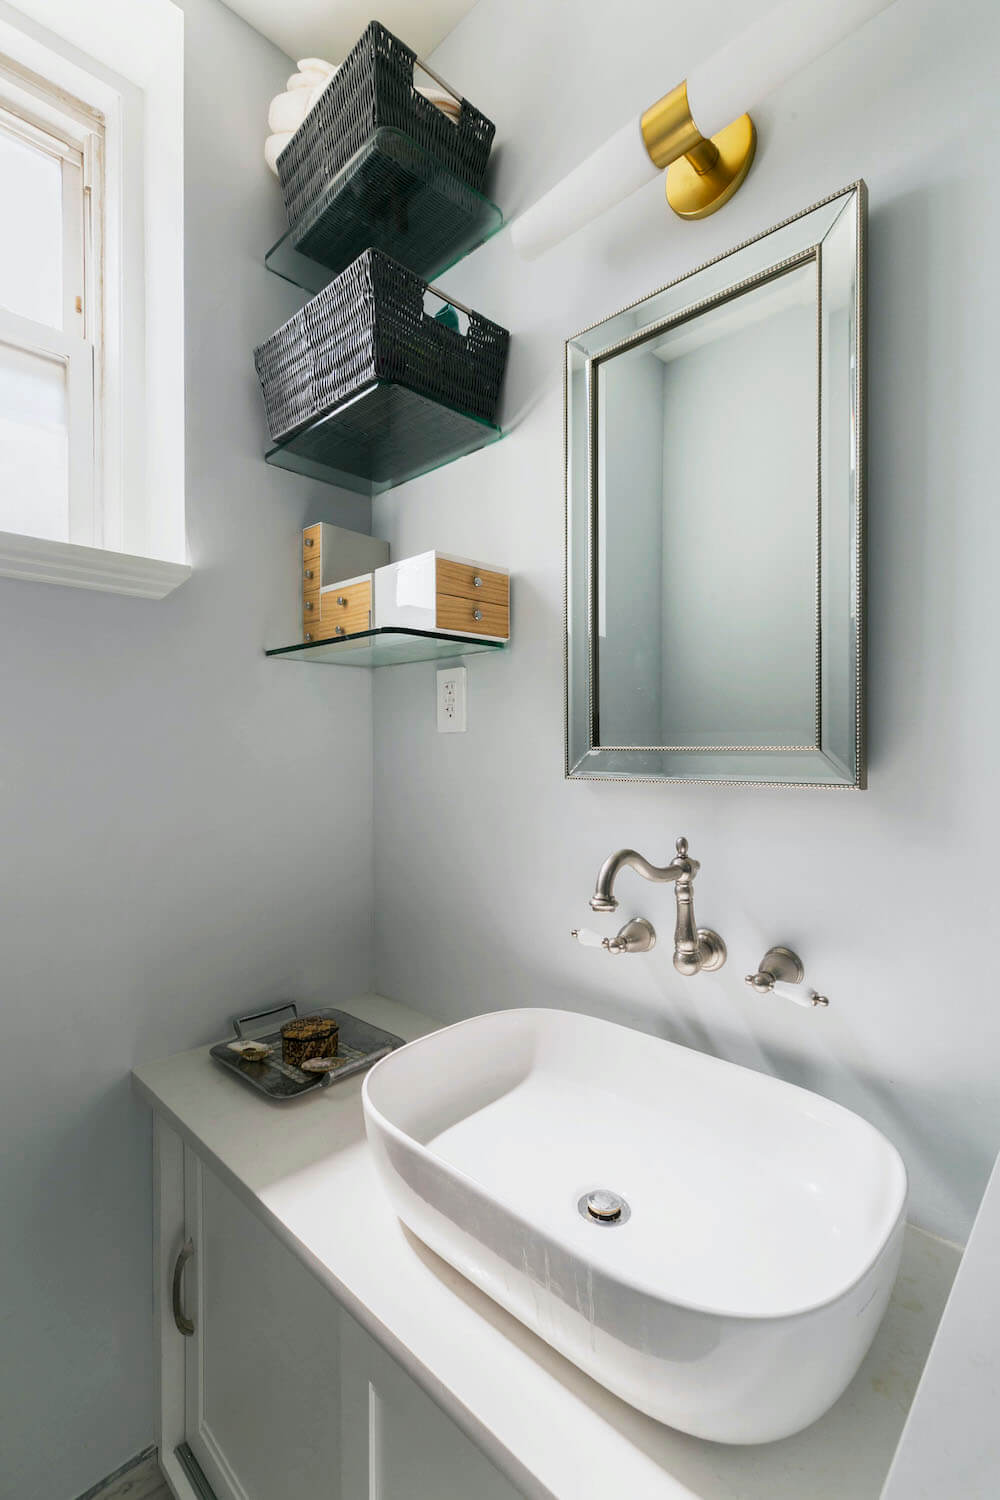 Bathroom vanity with vessel sink and glass shelving